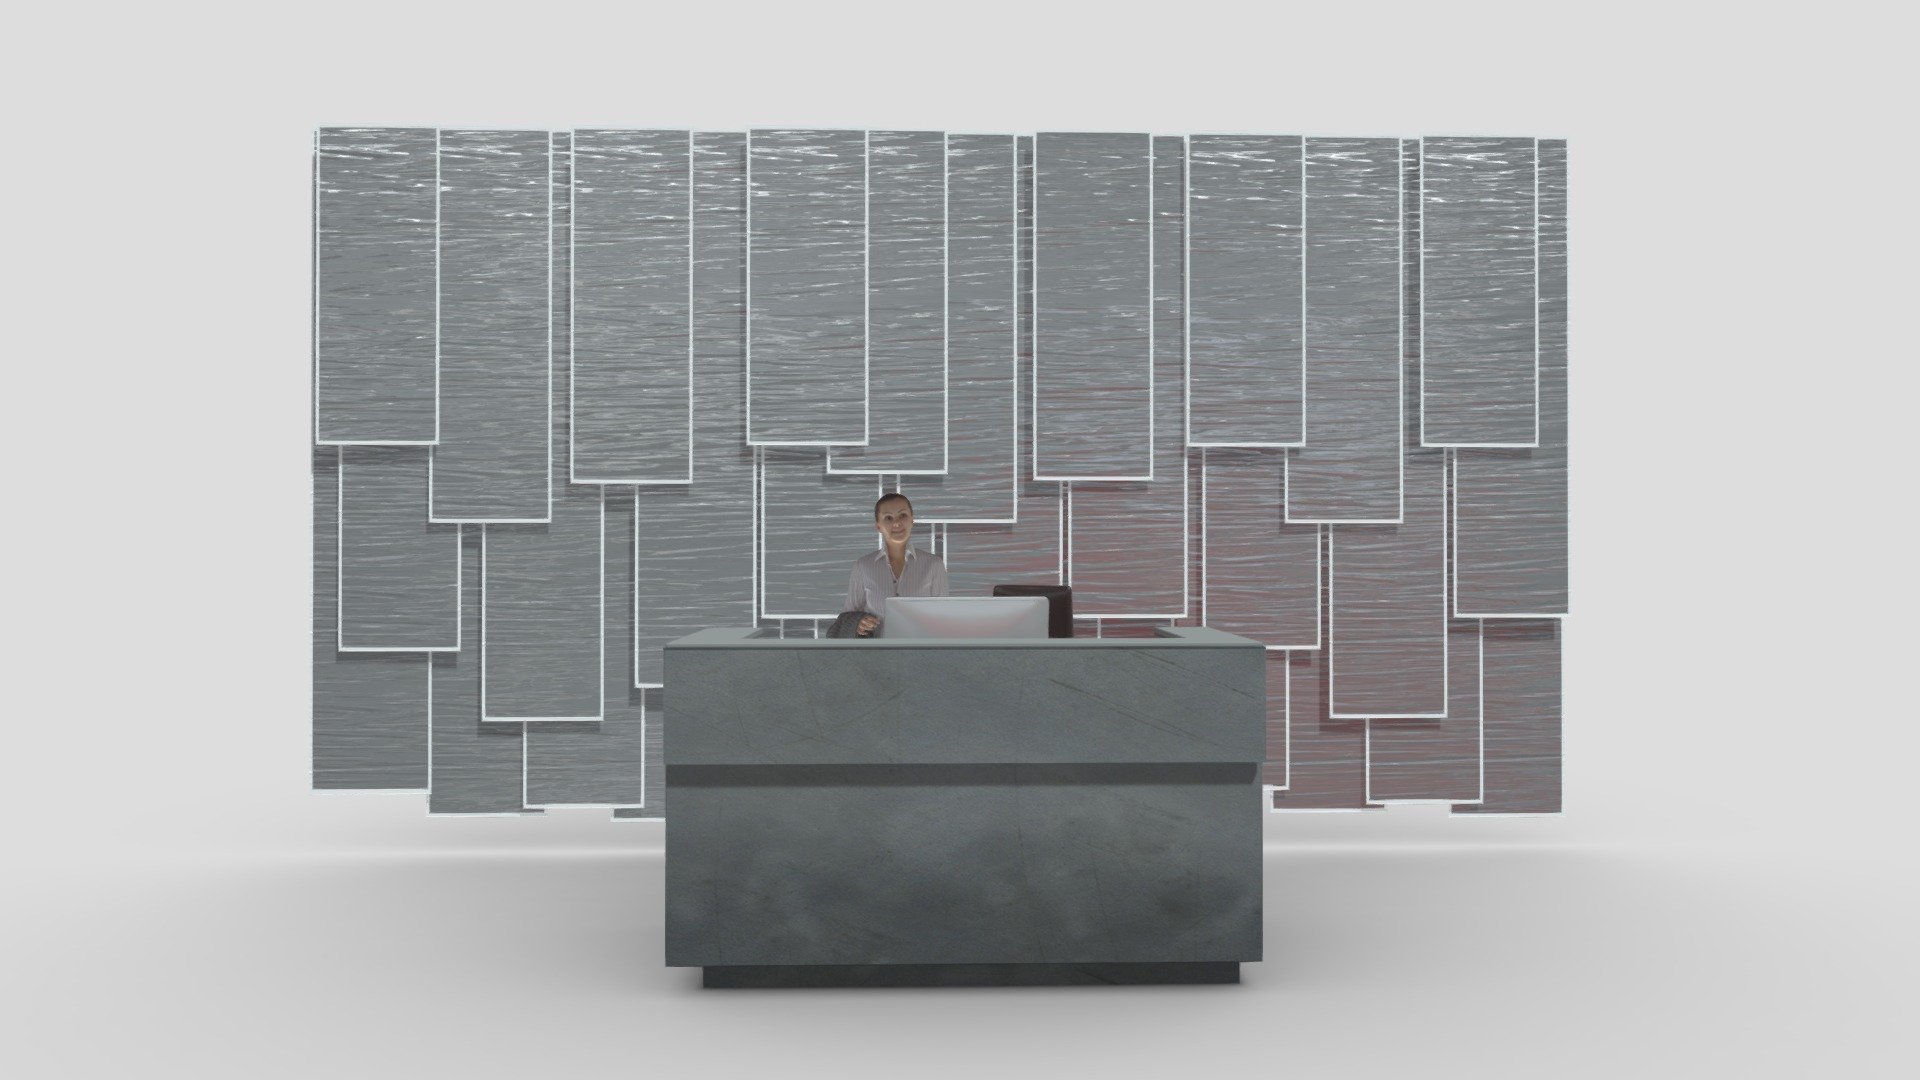 Reception Desk - 033

Native Format File : 3Ds Max 2020 &ndash; Rendering by Vray Next

File save as : 3Ds Max 2017 with converted all object to Editable Poly.

Exporting Formats :
Autodesk FBX ( .fbx ) and OBJ ( .obj &amp; .mtl ).

All 9 Texture maps are include as JPG.

Support 24/7 3d model